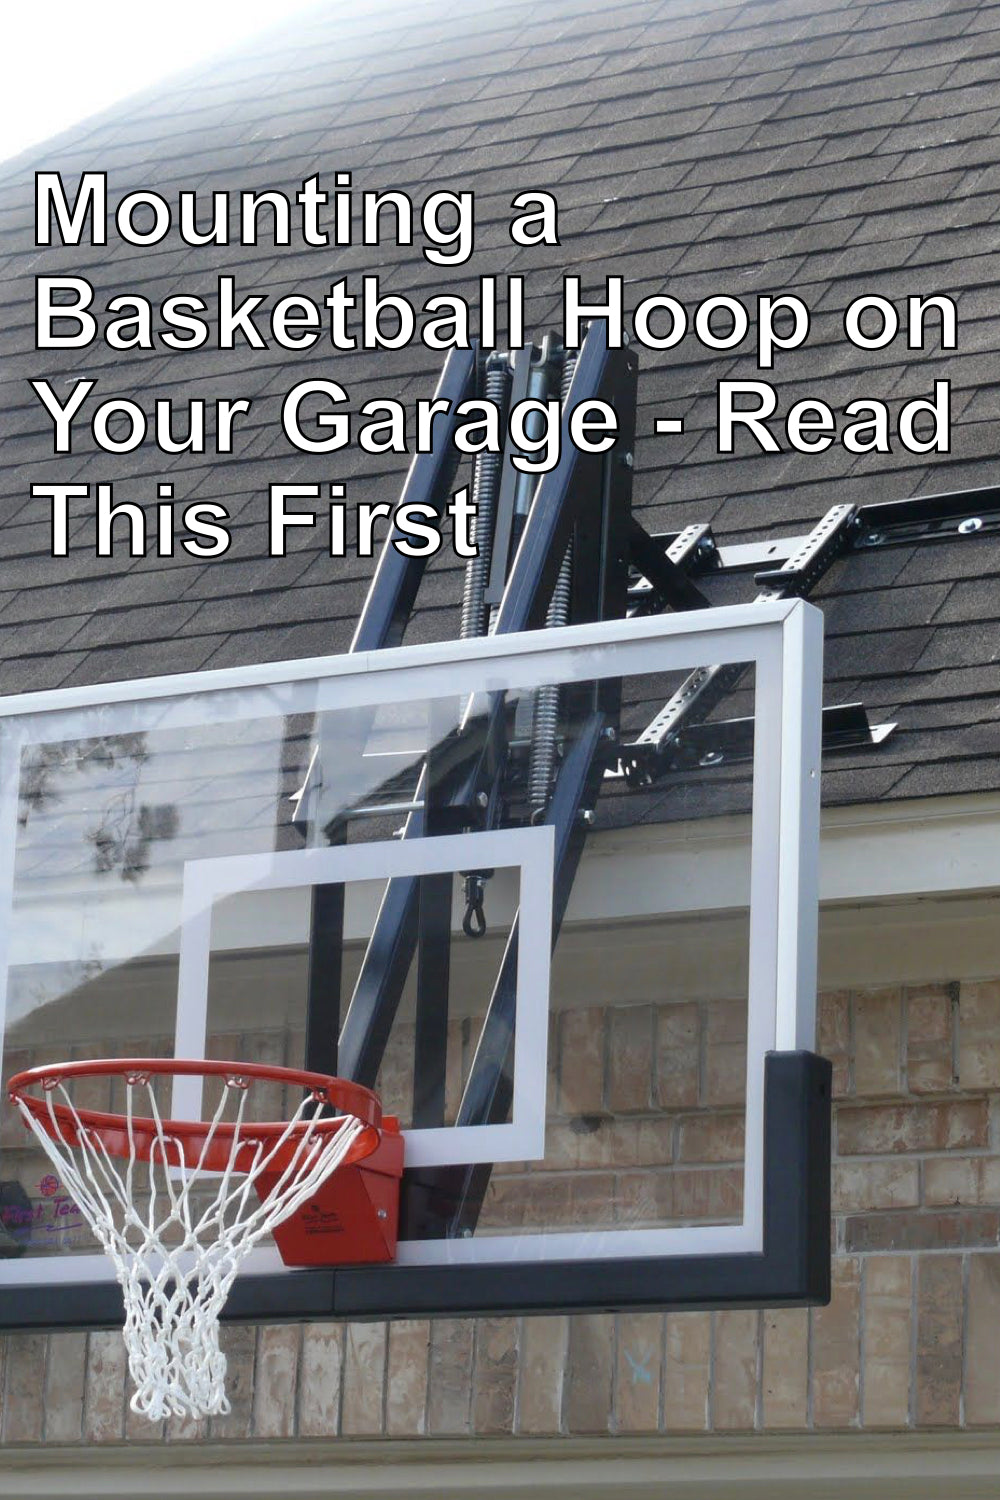 How to Mount a Basketball Hoop On Your Garage